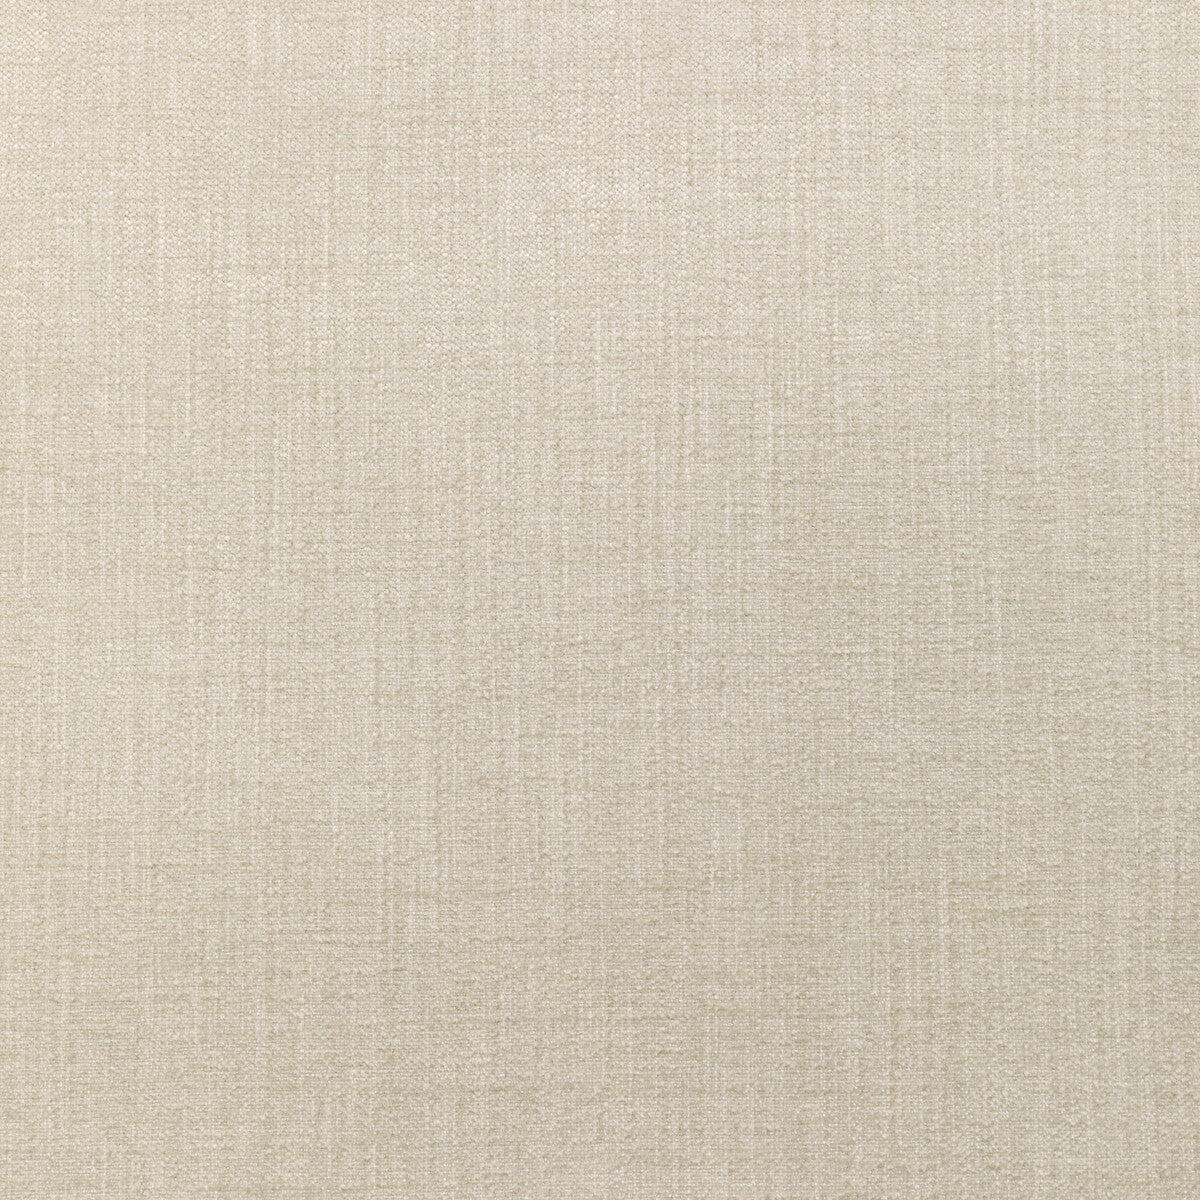 Accommodate fabric in husky color - pattern 36255.1.0 - by Kravet Contract in the Supreen collection